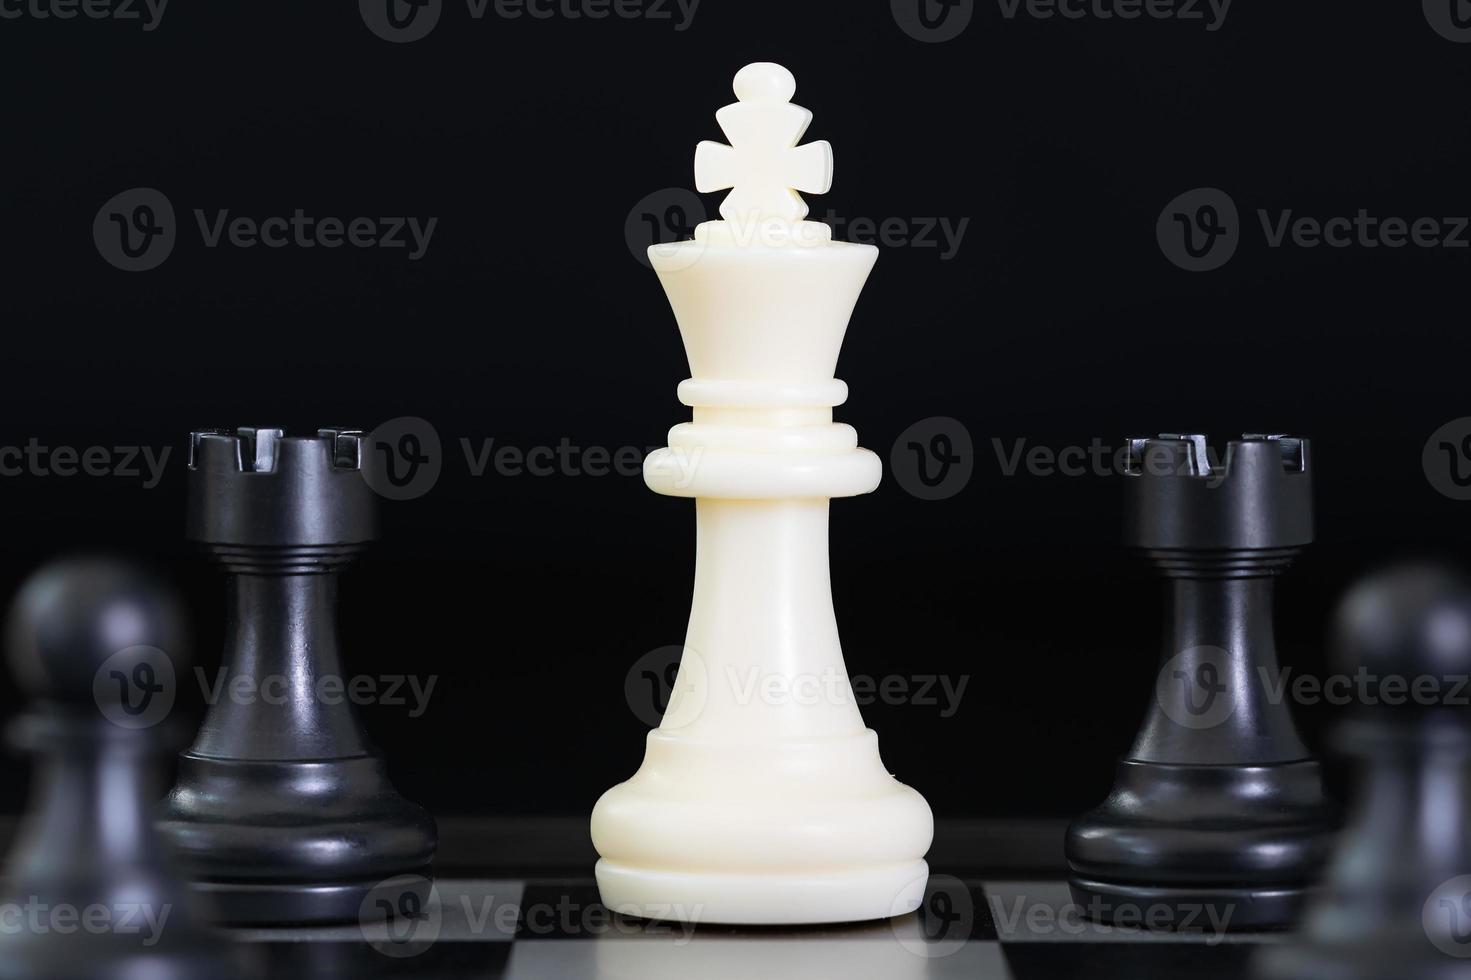 Chess pieces on chessboard photo